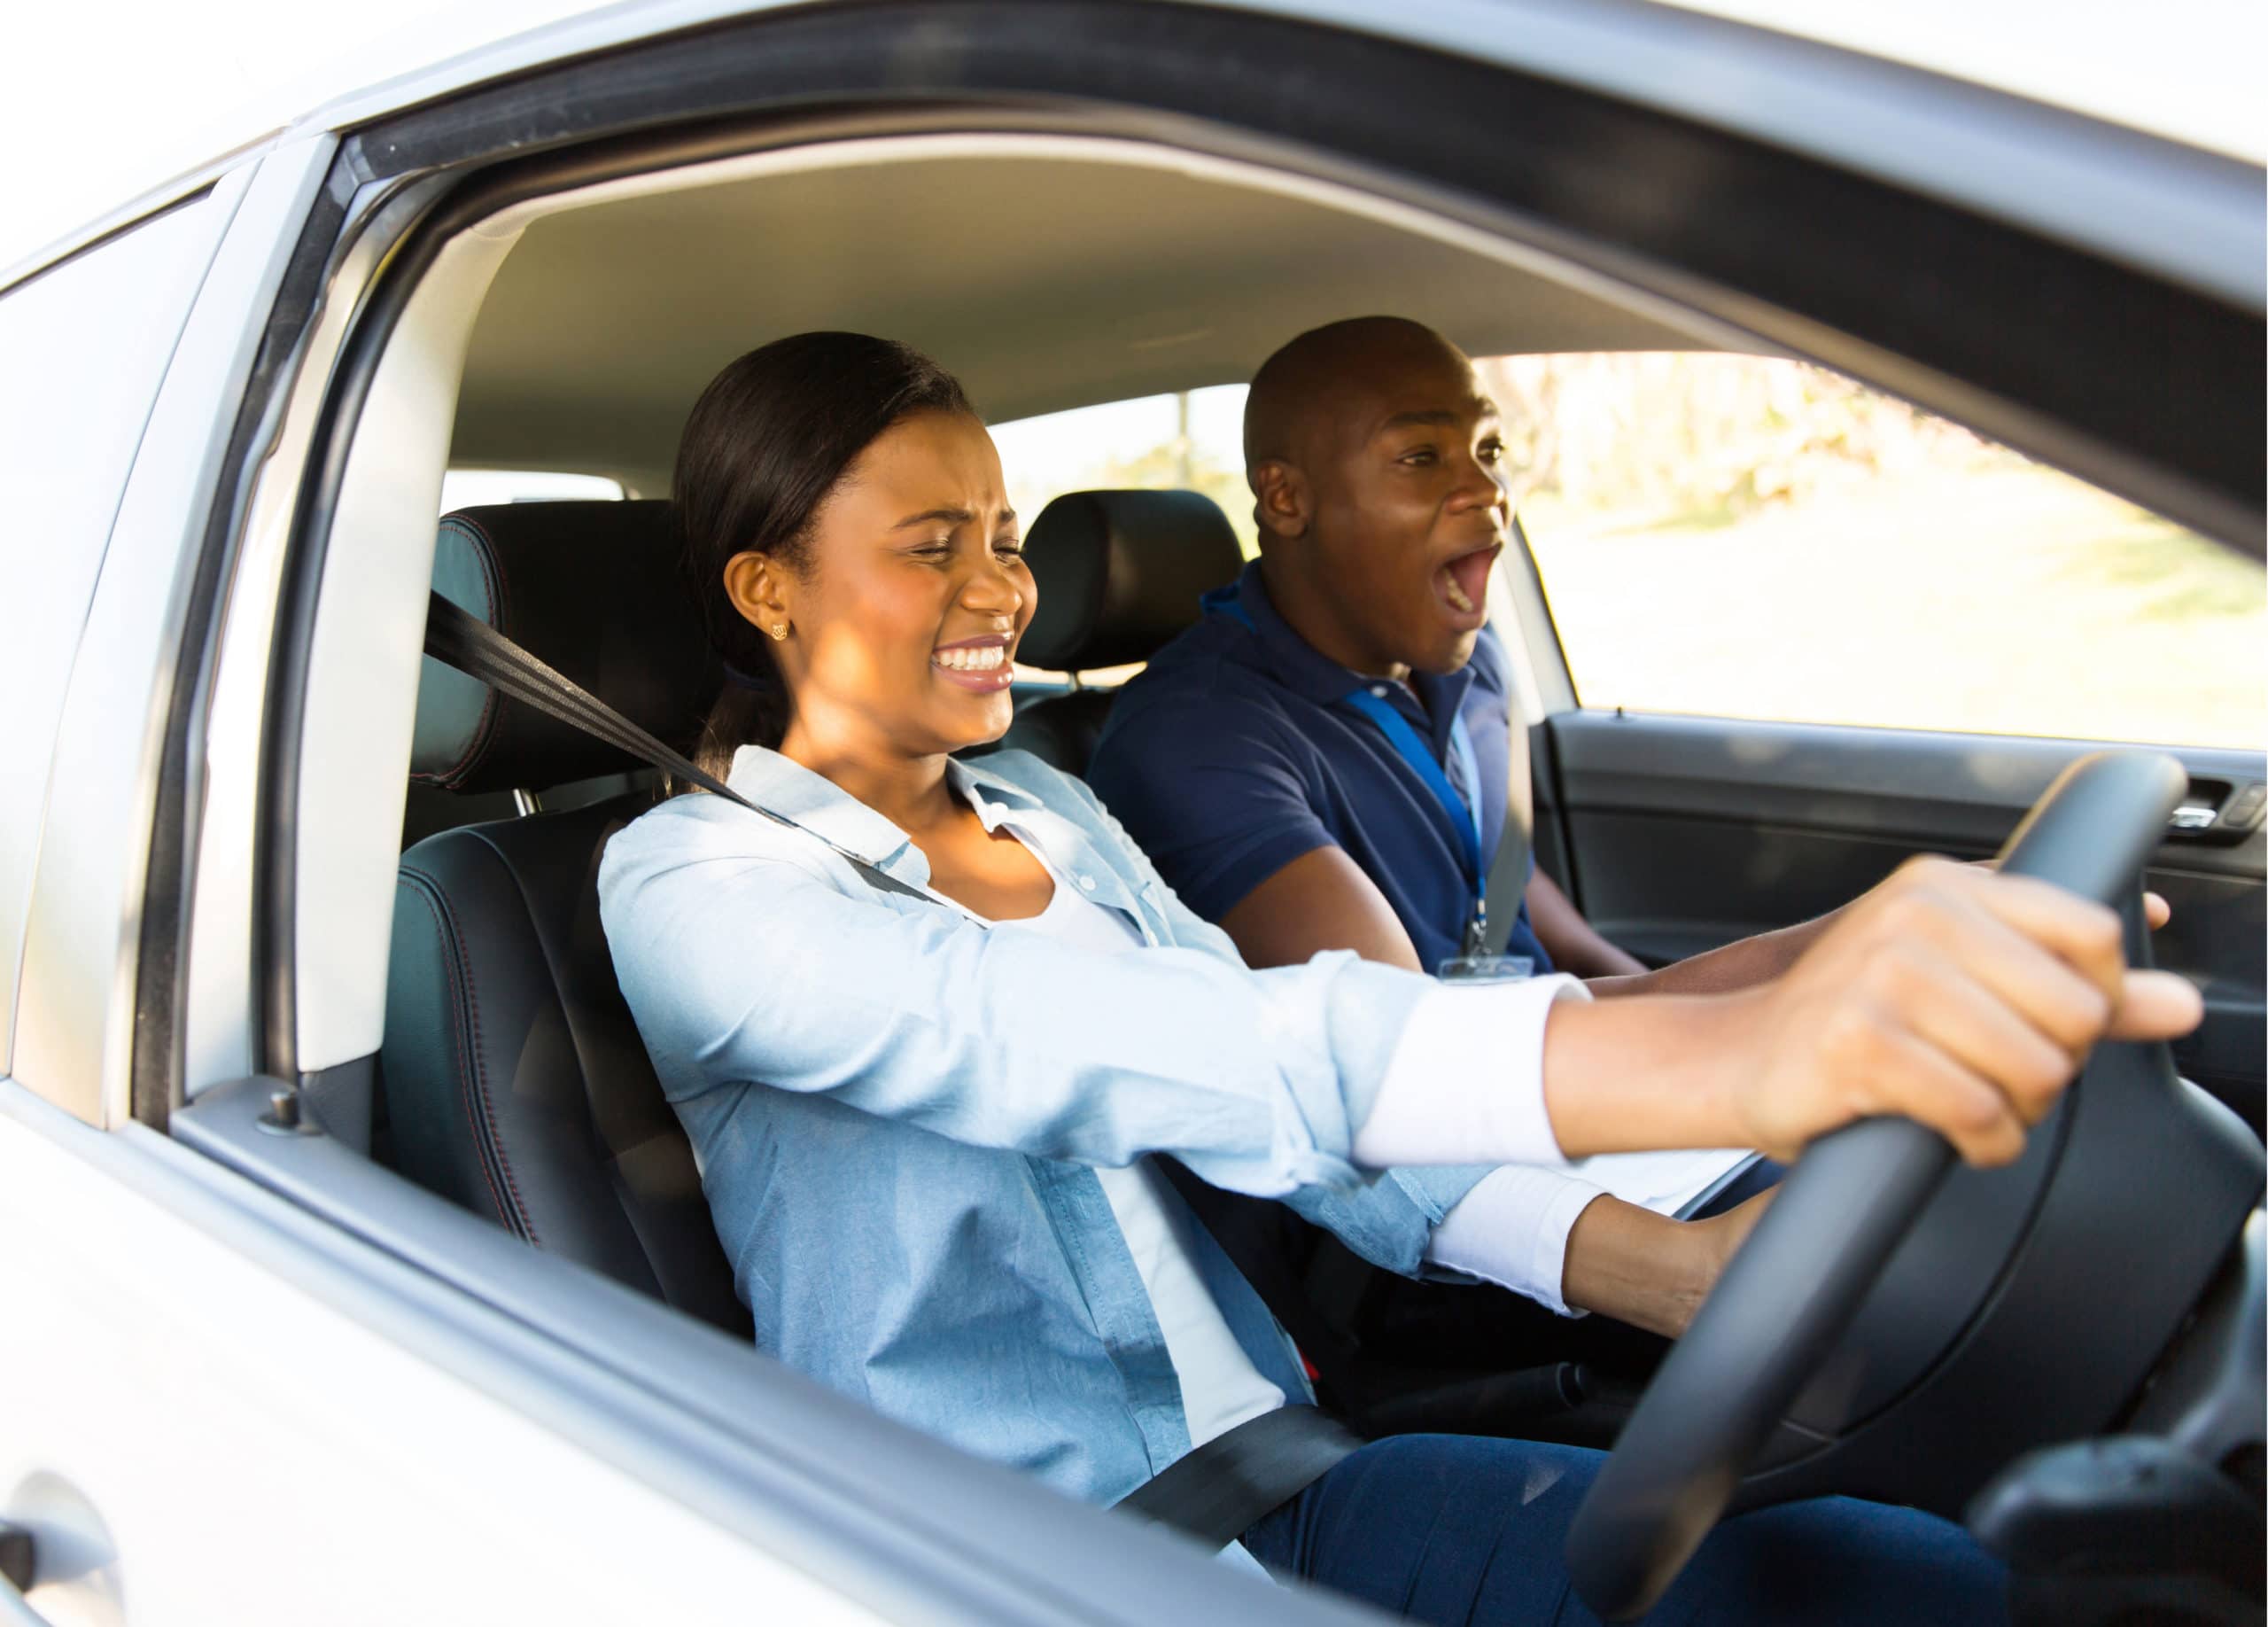 First Time Car Insurance: How to Get Cheap Car Insurance in 2020